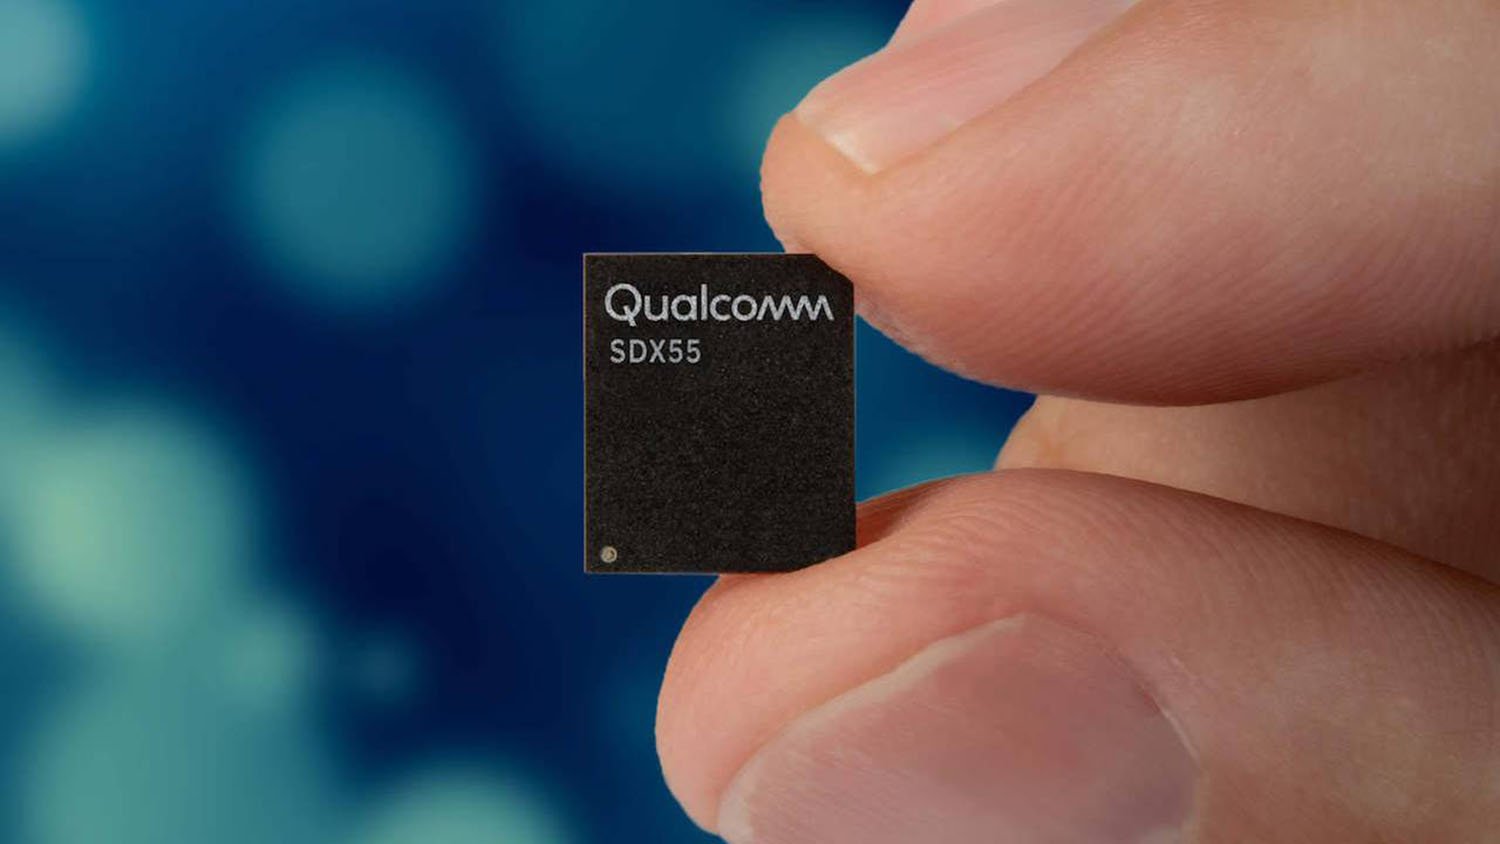 Apple to use Qualcomm 5G modems in future products, including X60 in 2021